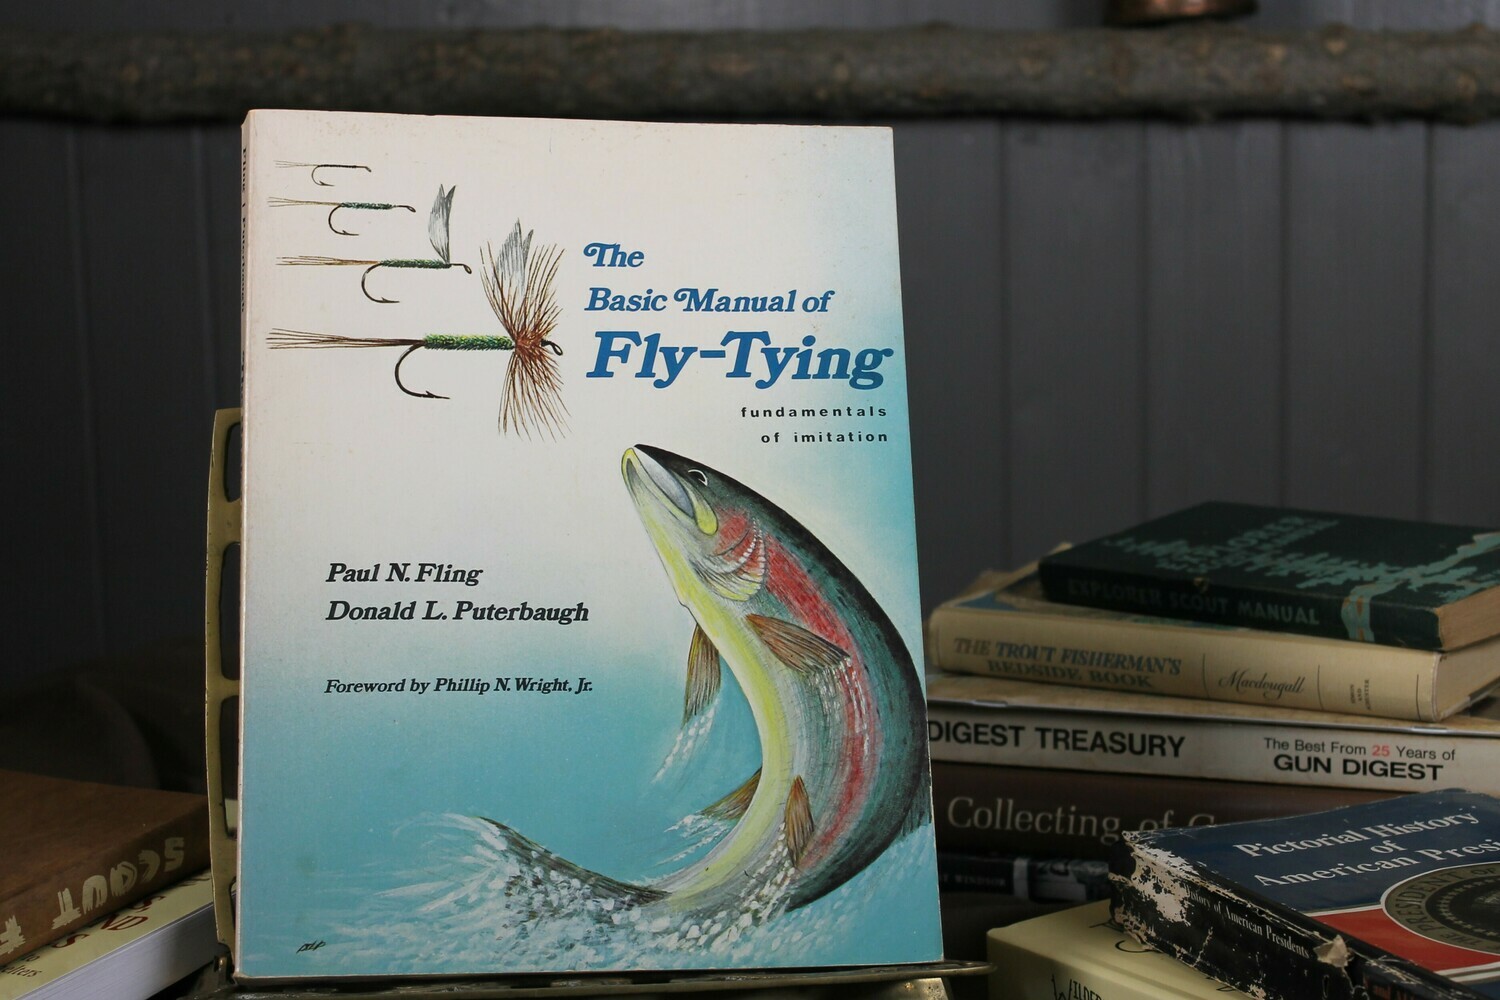 The Basic Manual of Fly-Tying